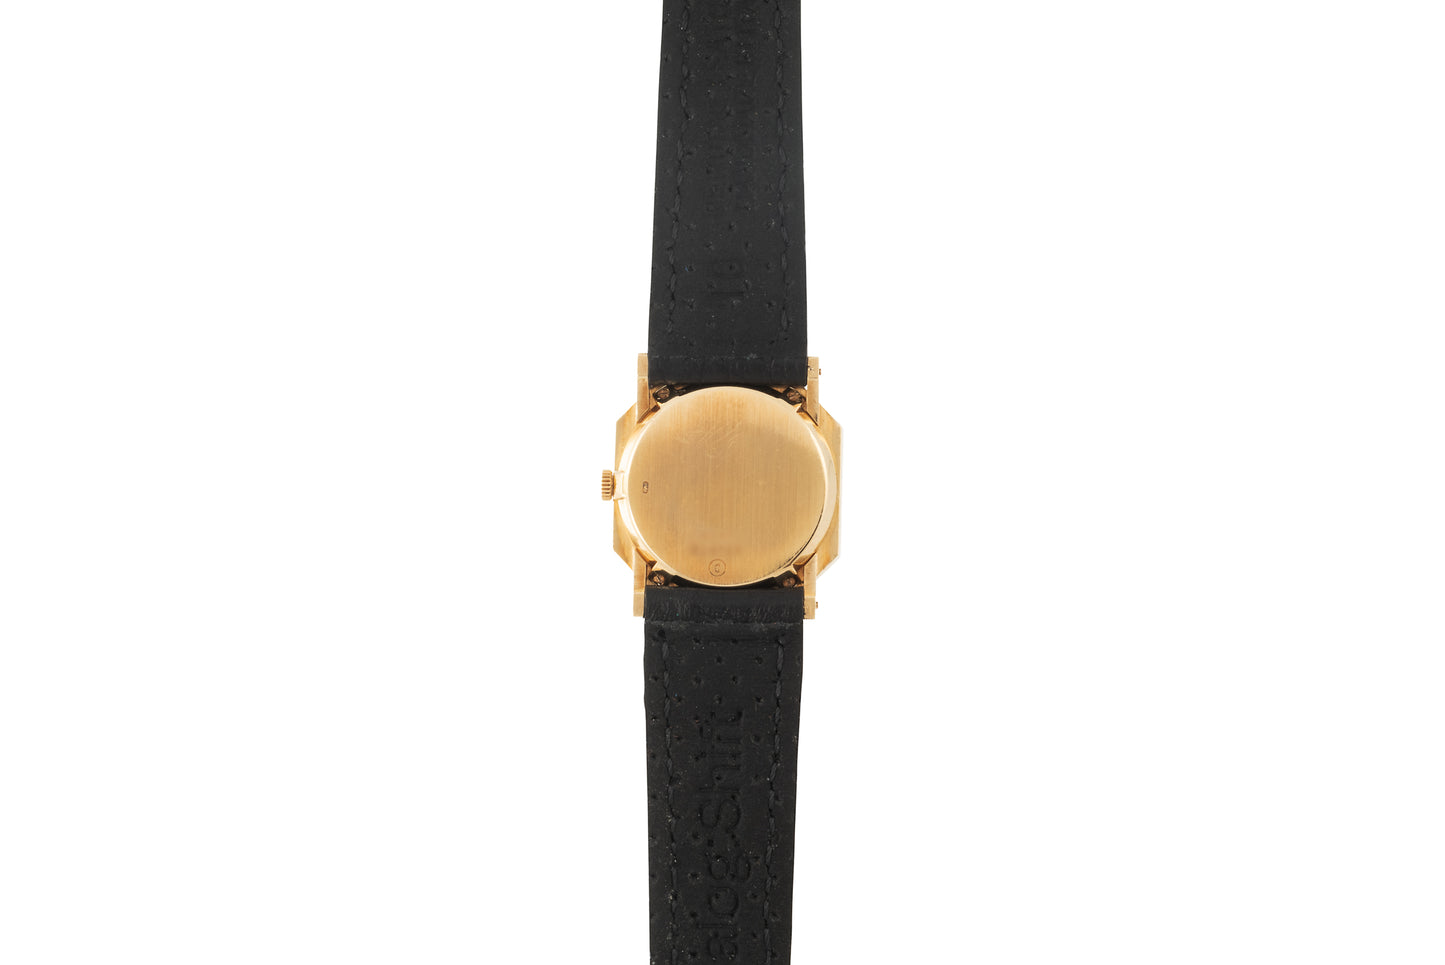 Piaget 'Turquoise' Dress Watch